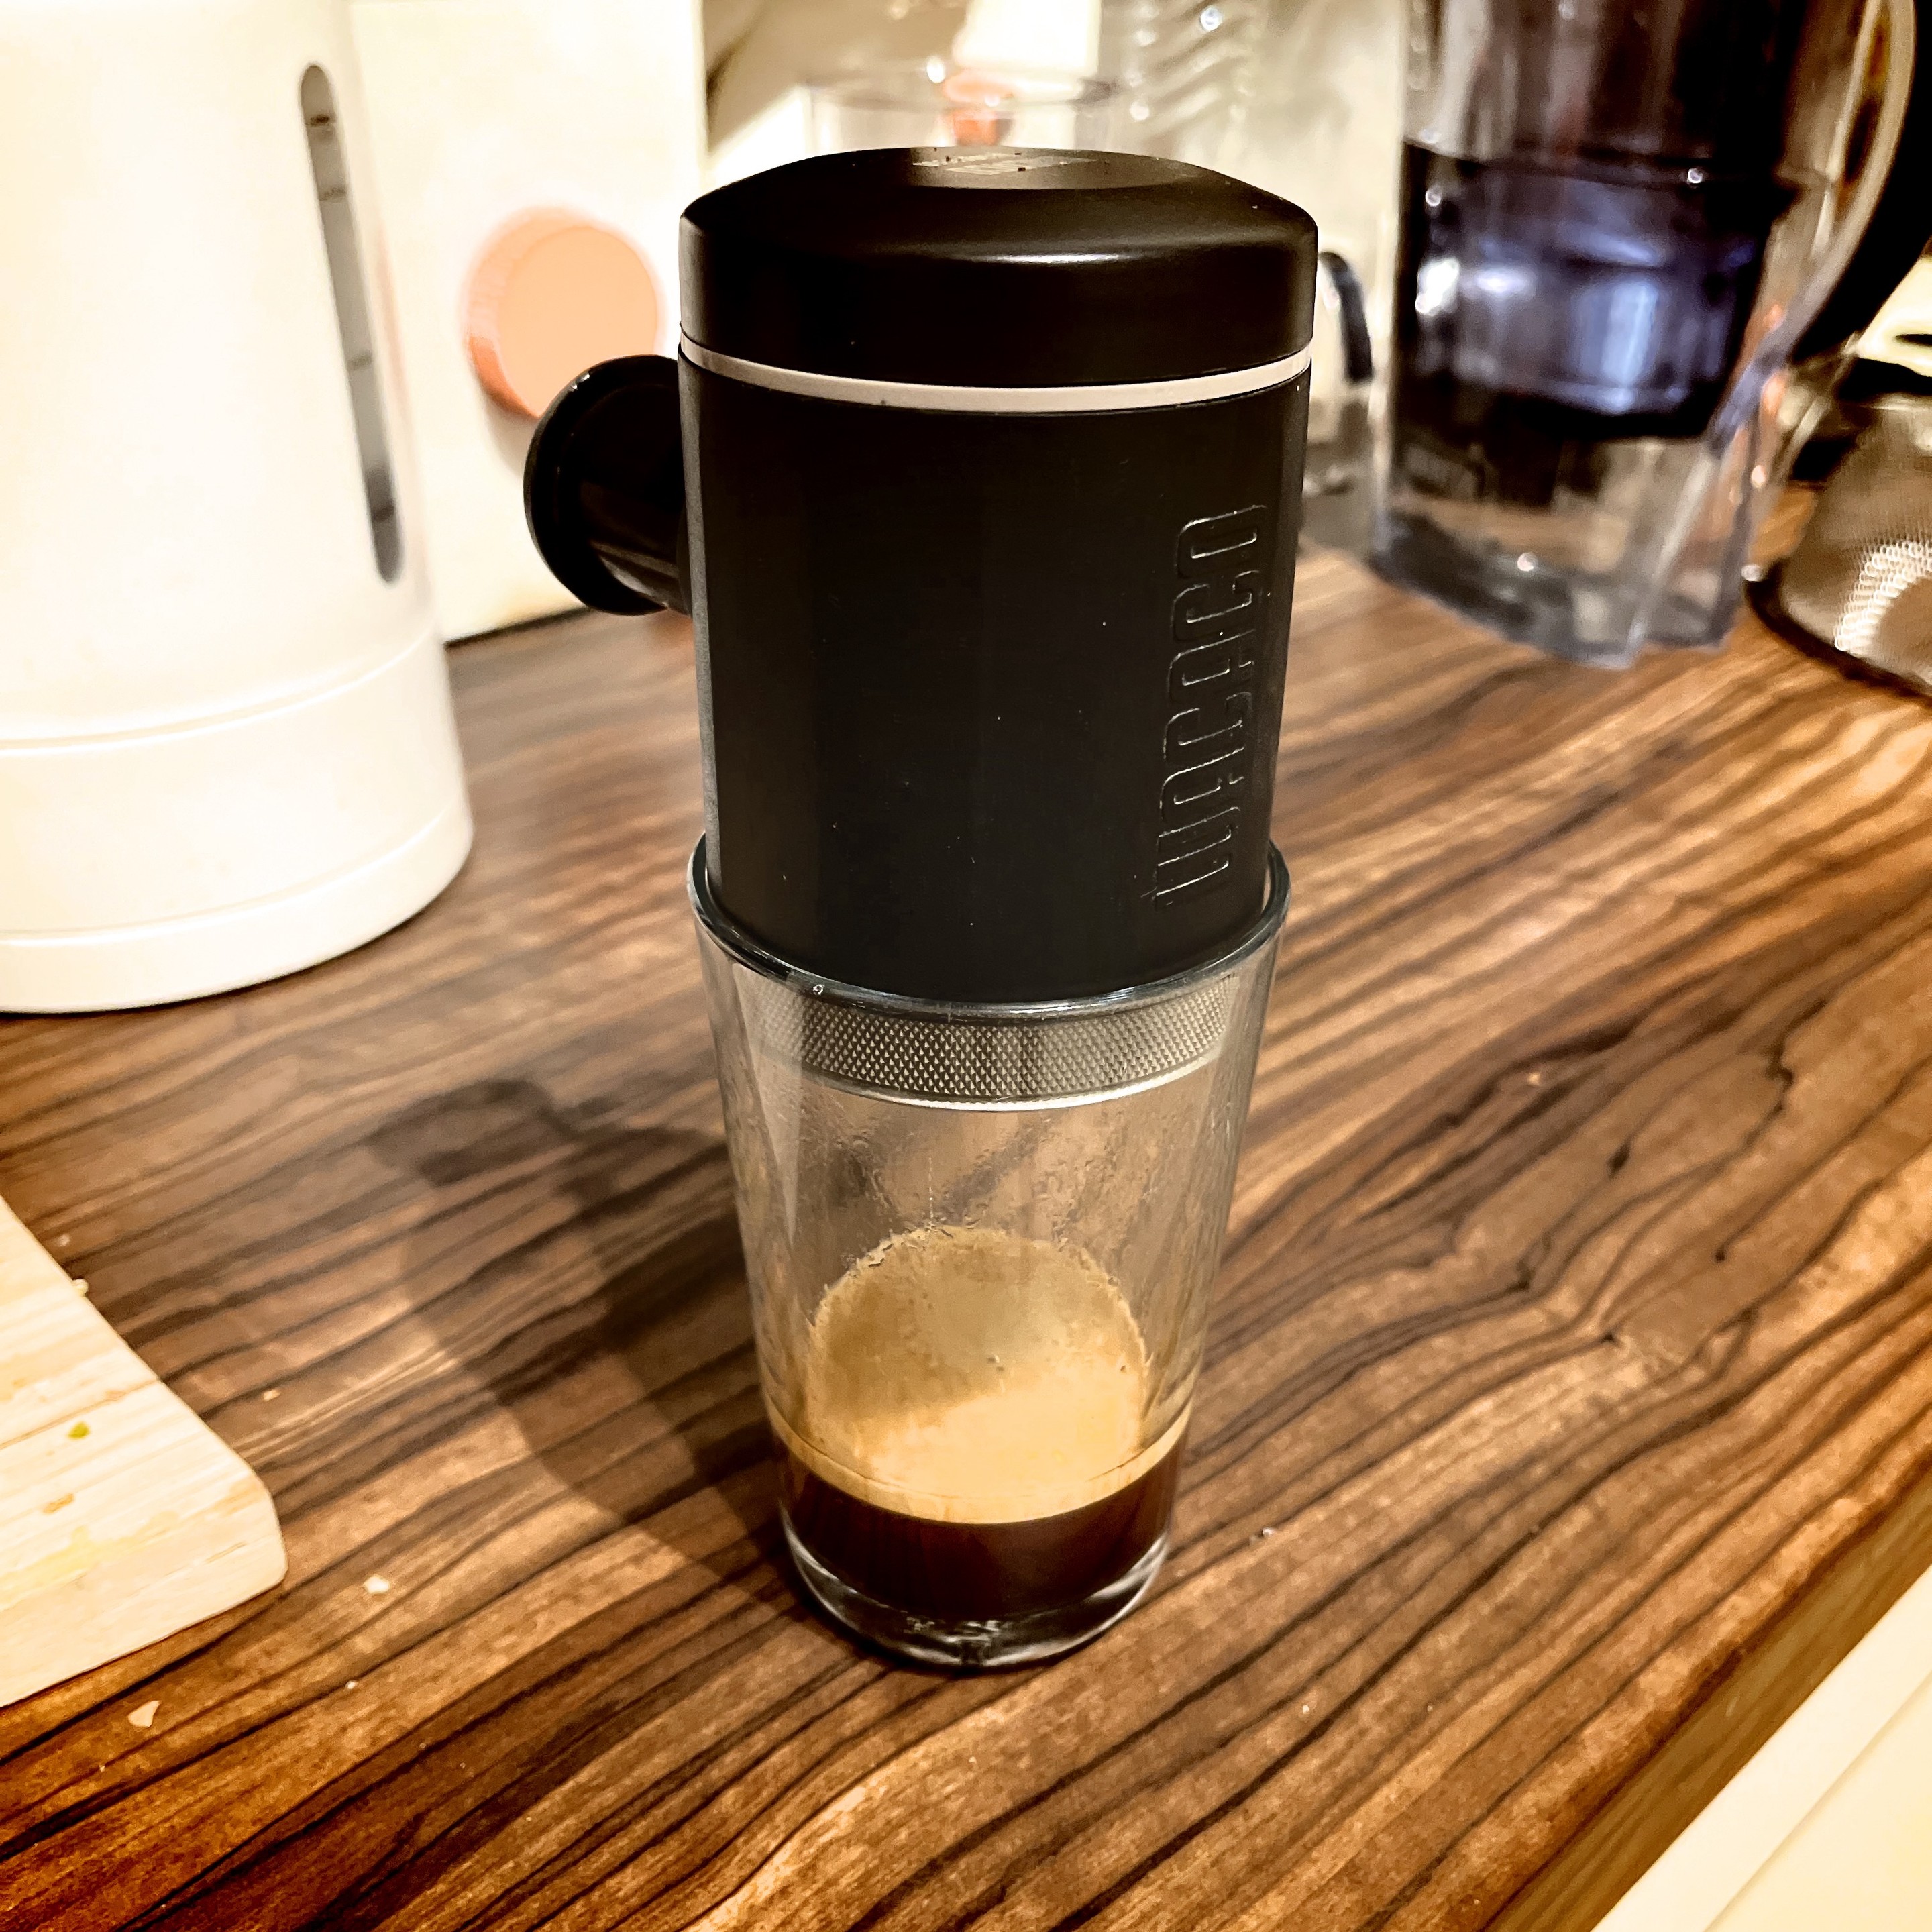 A portable coffee maker (Wacaco Nanopresso) sitting onto a glass on a wooden countertop with a small amount of coffee concentrate a.k.a. Espresso 